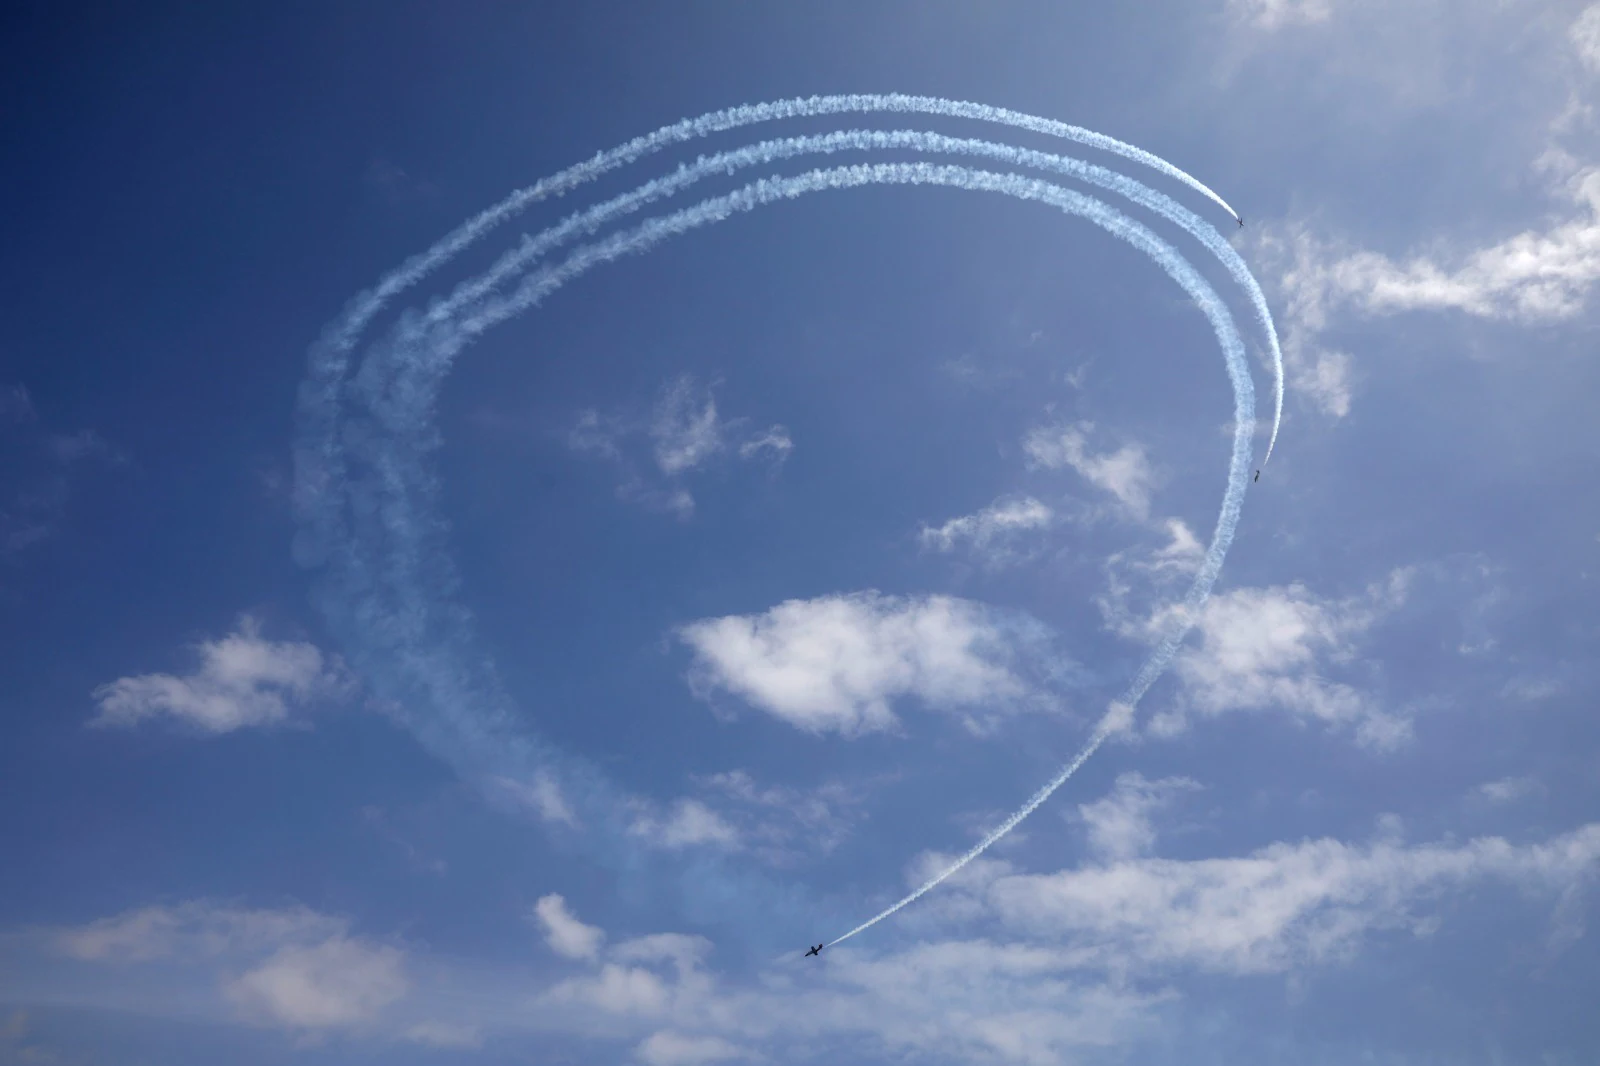 Torre del Mar International Airshow 2023, in pictures